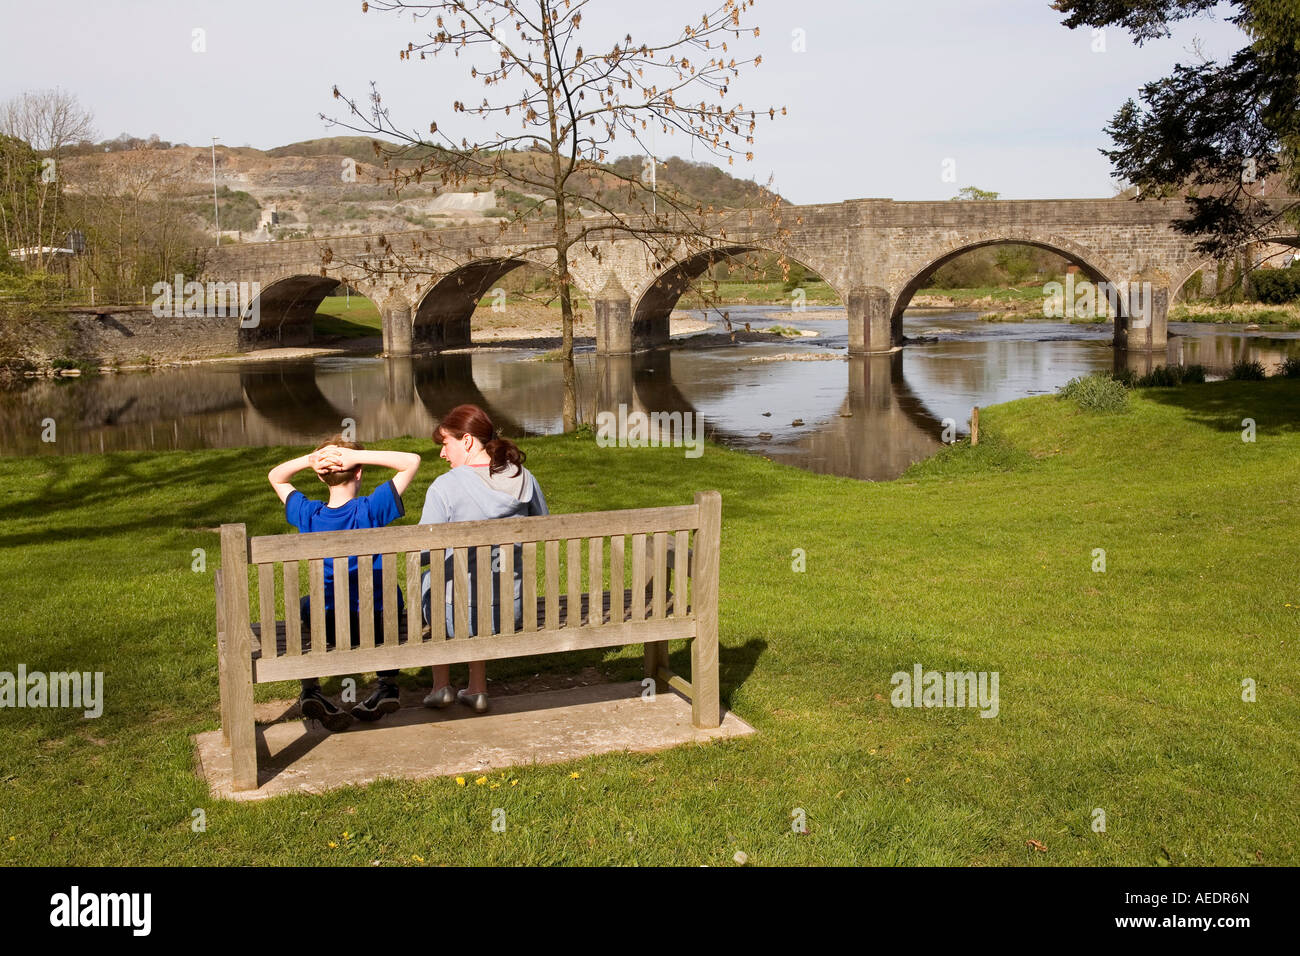 UK Wales Powys Builth Wells two people on bench by bridge over River Wye Stock Photo